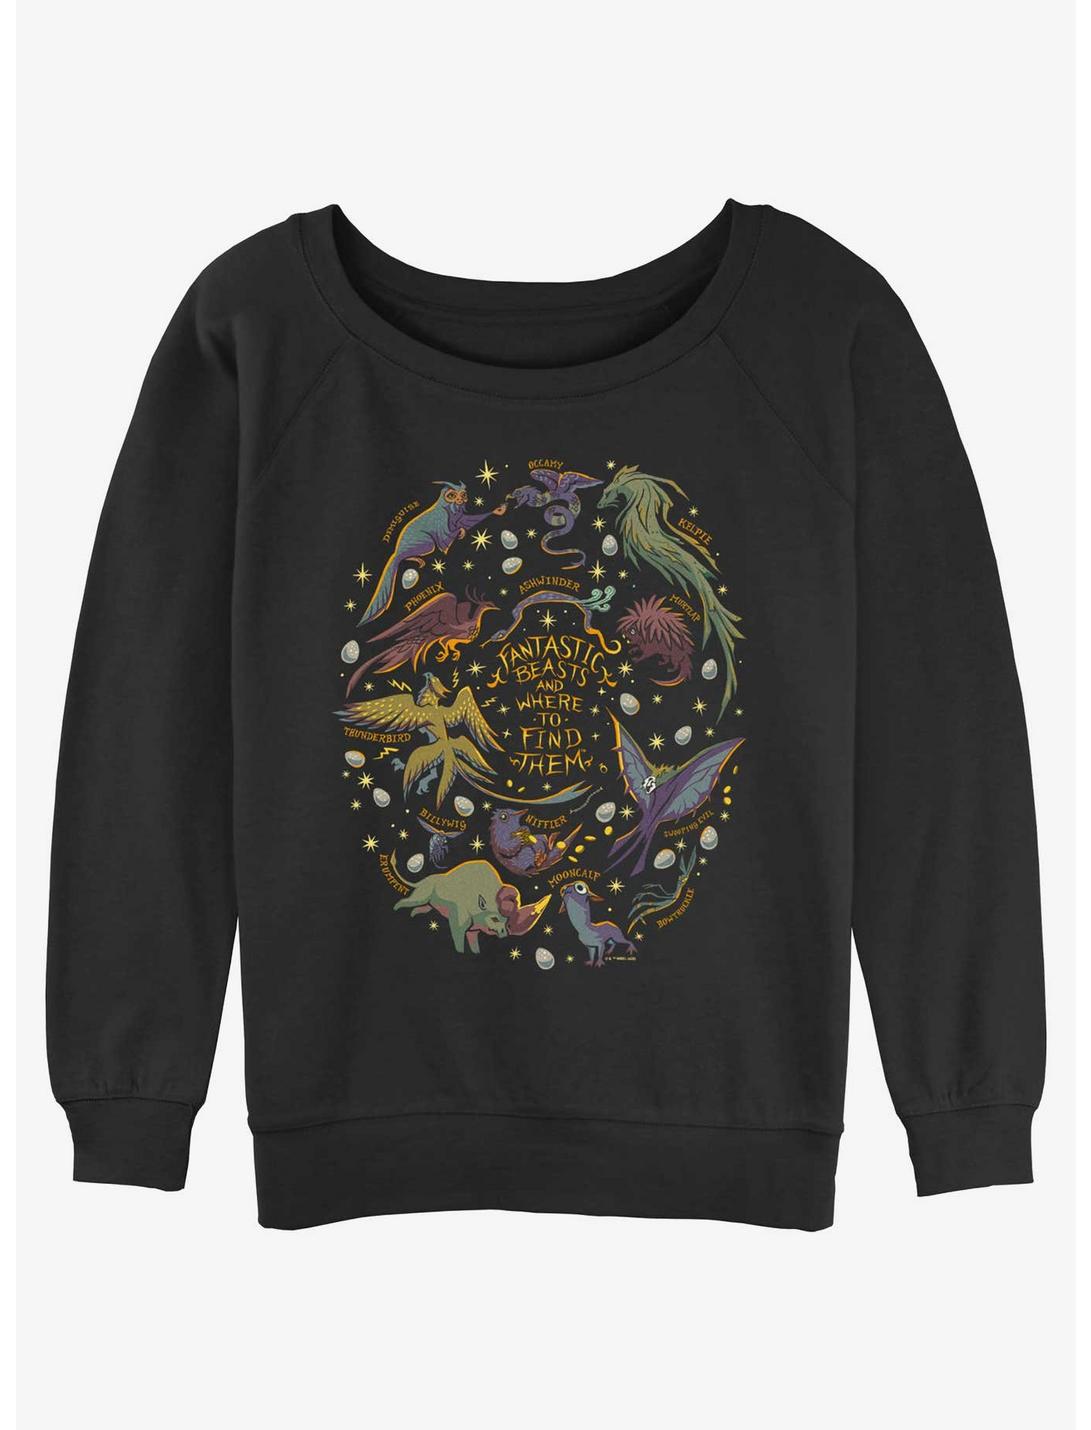 Fantastic Beasts and Where to Find Them Species Womens Slouchy Sweatshirt, BLACK, hi-res